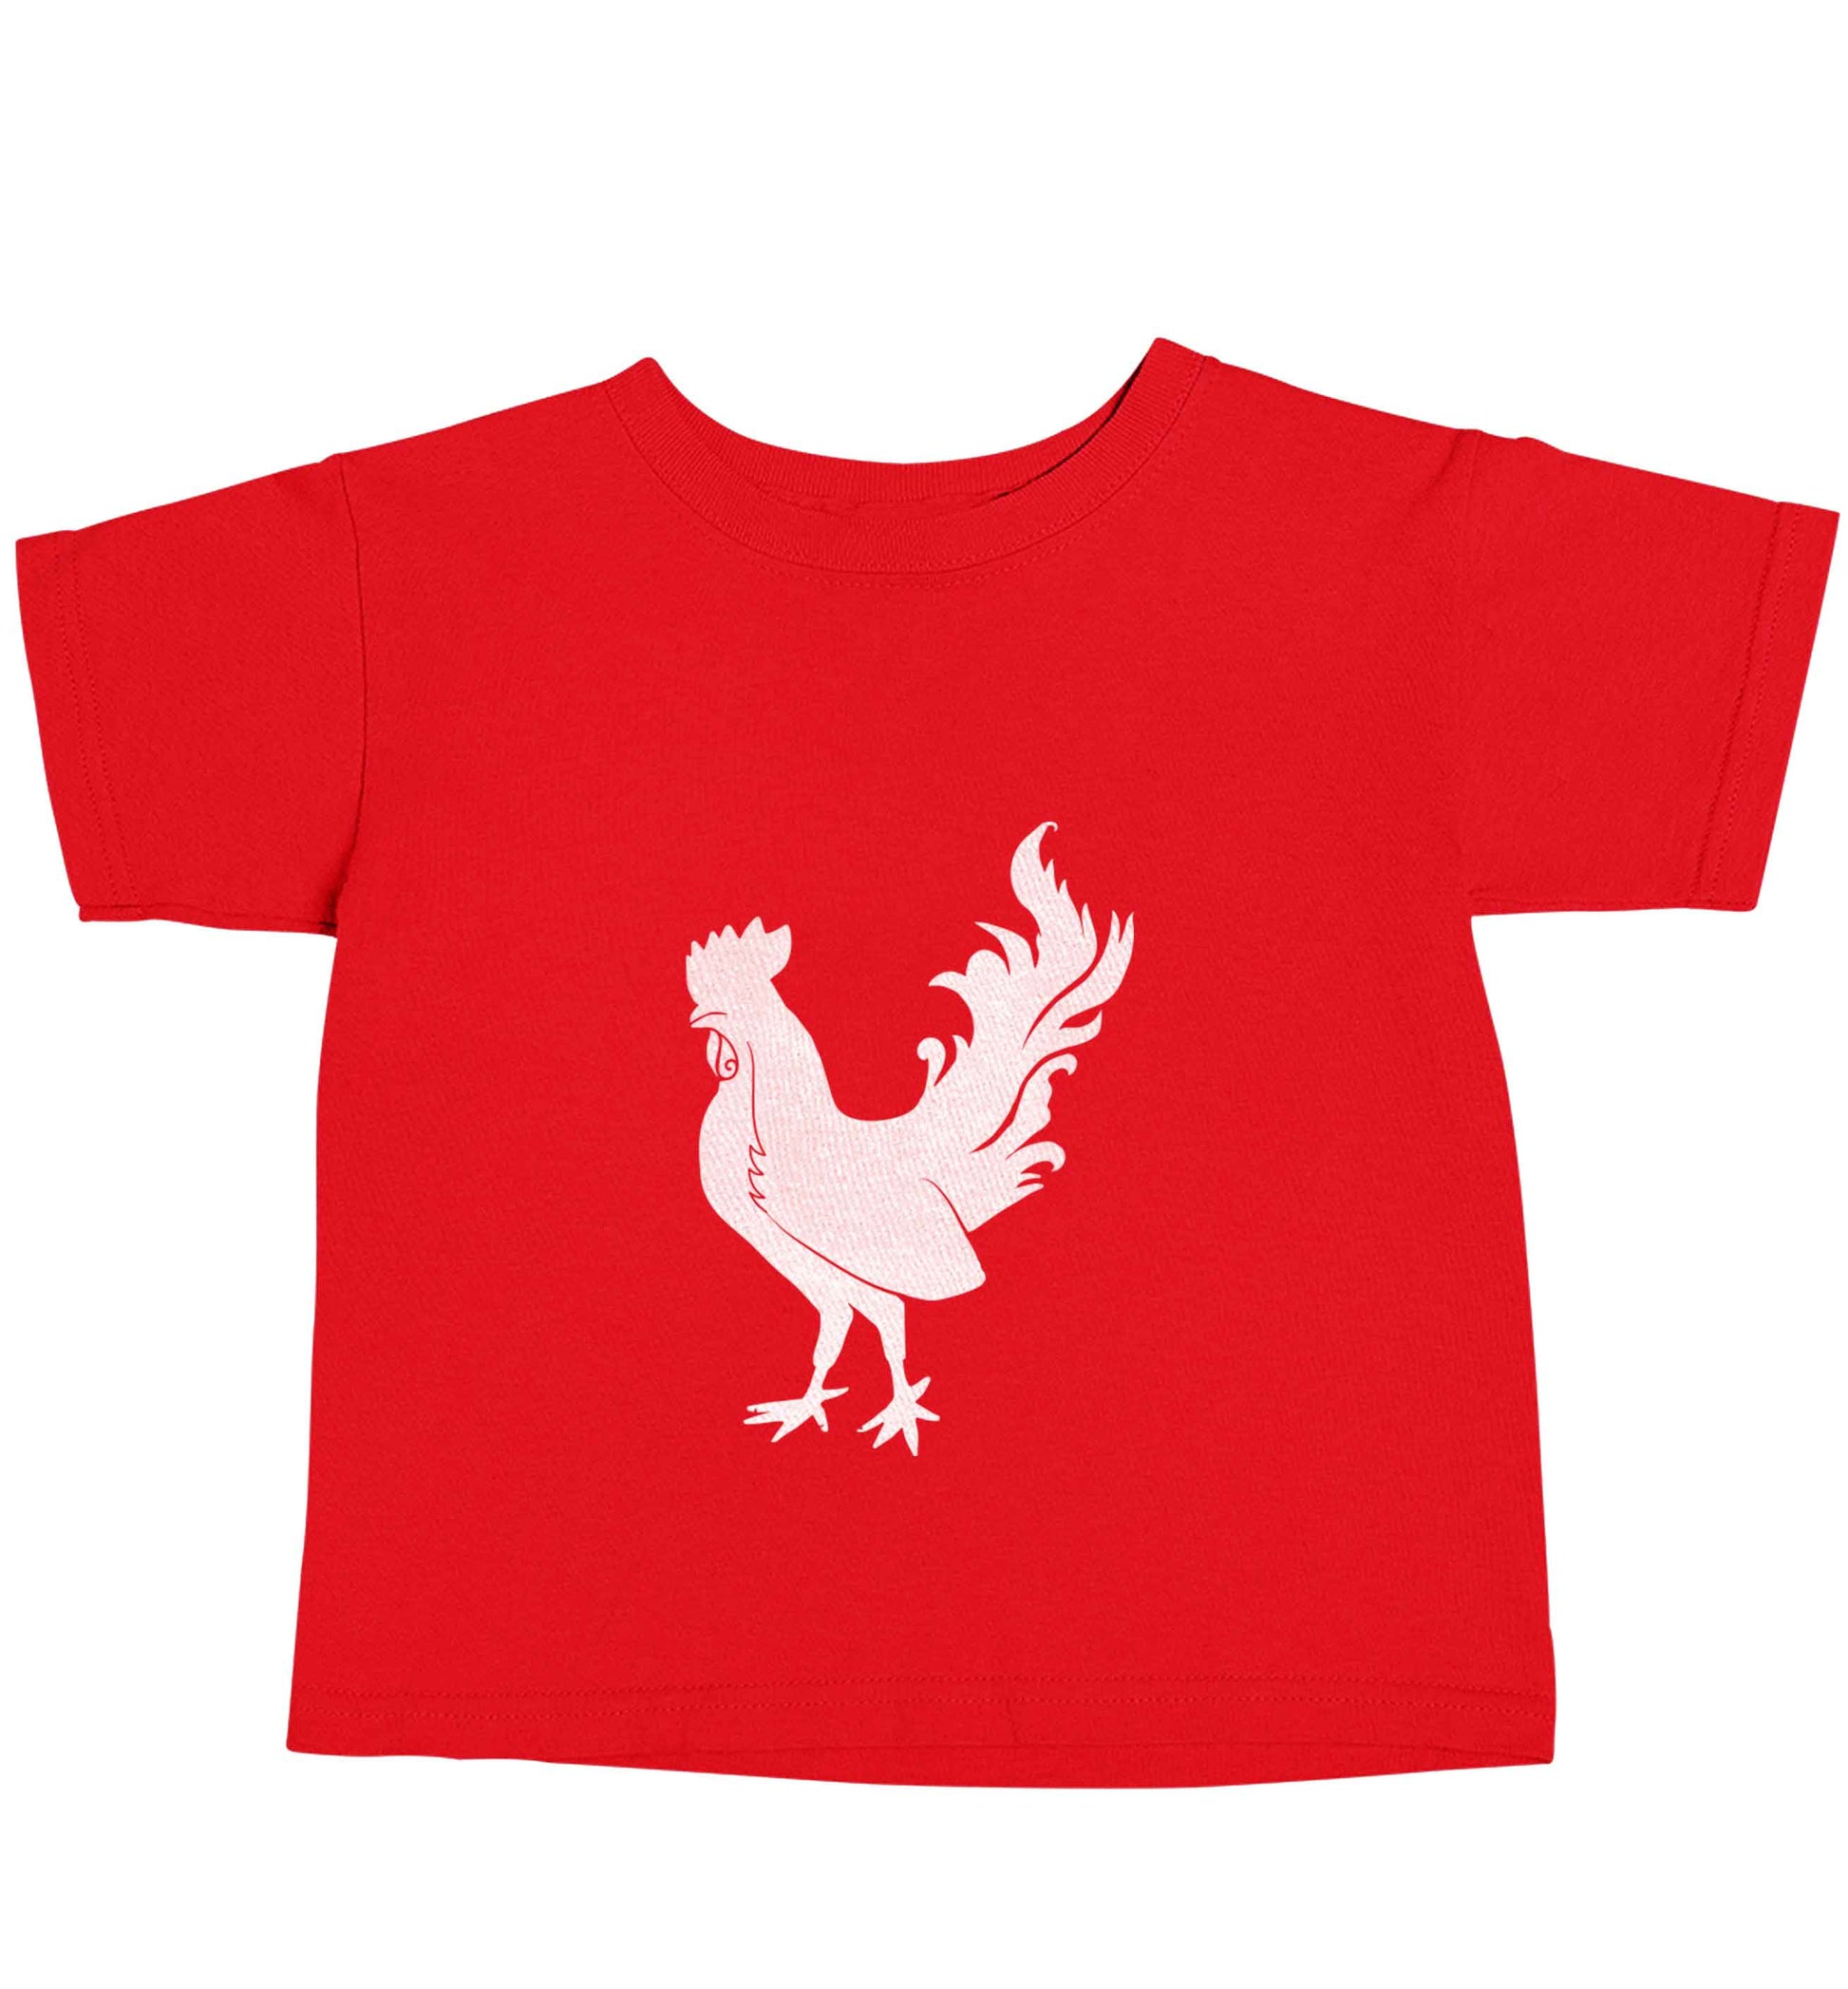 Rooster red baby toddler Tshirt 2 Years